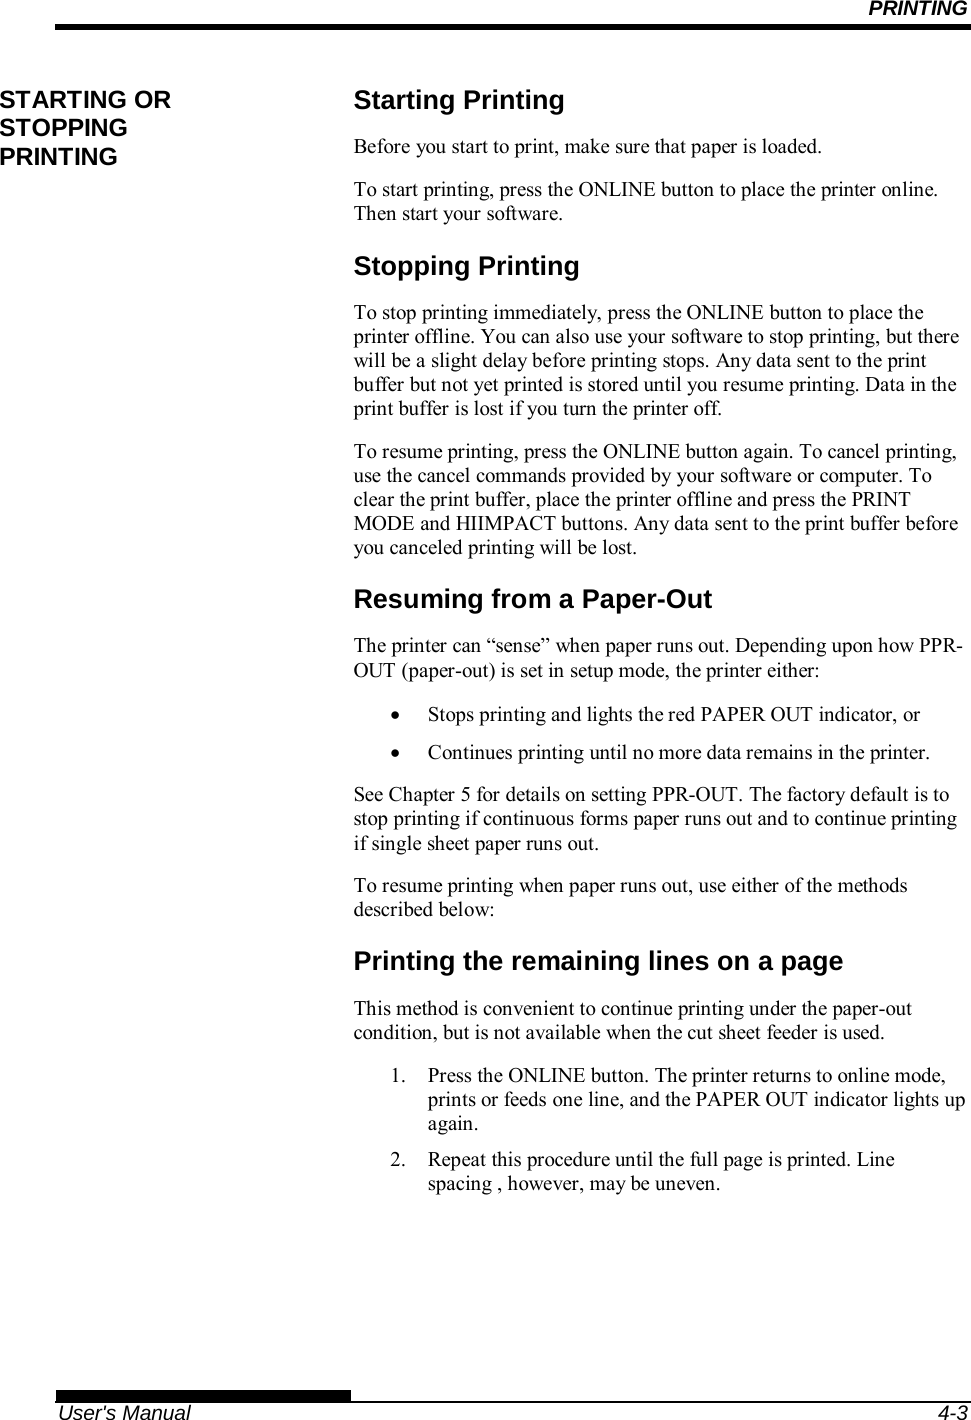 PRINTING   User&apos;s Manual  4-3 Starting Printing Before you start to print, make sure that paper is loaded. To start printing, press the ONLINE button to place the printer online. Then start your software. Stopping Printing To stop printing immediately, press the ONLINE button to place the printer offline. You can also use your software to stop printing, but there will be a slight delay before printing stops. Any data sent to the print buffer but not yet printed is stored until you resume printing. Data in the print buffer is lost if you turn the printer off. To resume printing, press the ONLINE button again. To cancel printing, use the cancel commands provided by your software or computer. To clear the print buffer, place the printer offline and press the PRINT MODE and HIIMPACT buttons. Any data sent to the print buffer before you canceled printing will be lost. Resuming from a Paper-Out The printer can “sense” when paper runs out. Depending upon how PPR-OUT (paper-out) is set in setup mode, the printer either:   Stops printing and lights the red PAPER OUT indicator, or   Continues printing until no more data remains in the printer. See Chapter 5 for details on setting PPR-OUT. The factory default is to stop printing if continuous forms paper runs out and to continue printing if single sheet paper runs out. To resume printing when paper runs out, use either of the methods described below: Printing the remaining lines on a page This method is convenient to continue printing under the paper-out condition, but is not available when the cut sheet feeder is used. 1.  Press the ONLINE button. The printer returns to online mode, prints or feeds one line, and the PAPER OUT indicator lights up again. 2.  Repeat this procedure until the full page is printed. Line spacing , however, may be uneven. STARTING OR STOPPING PRINTING 